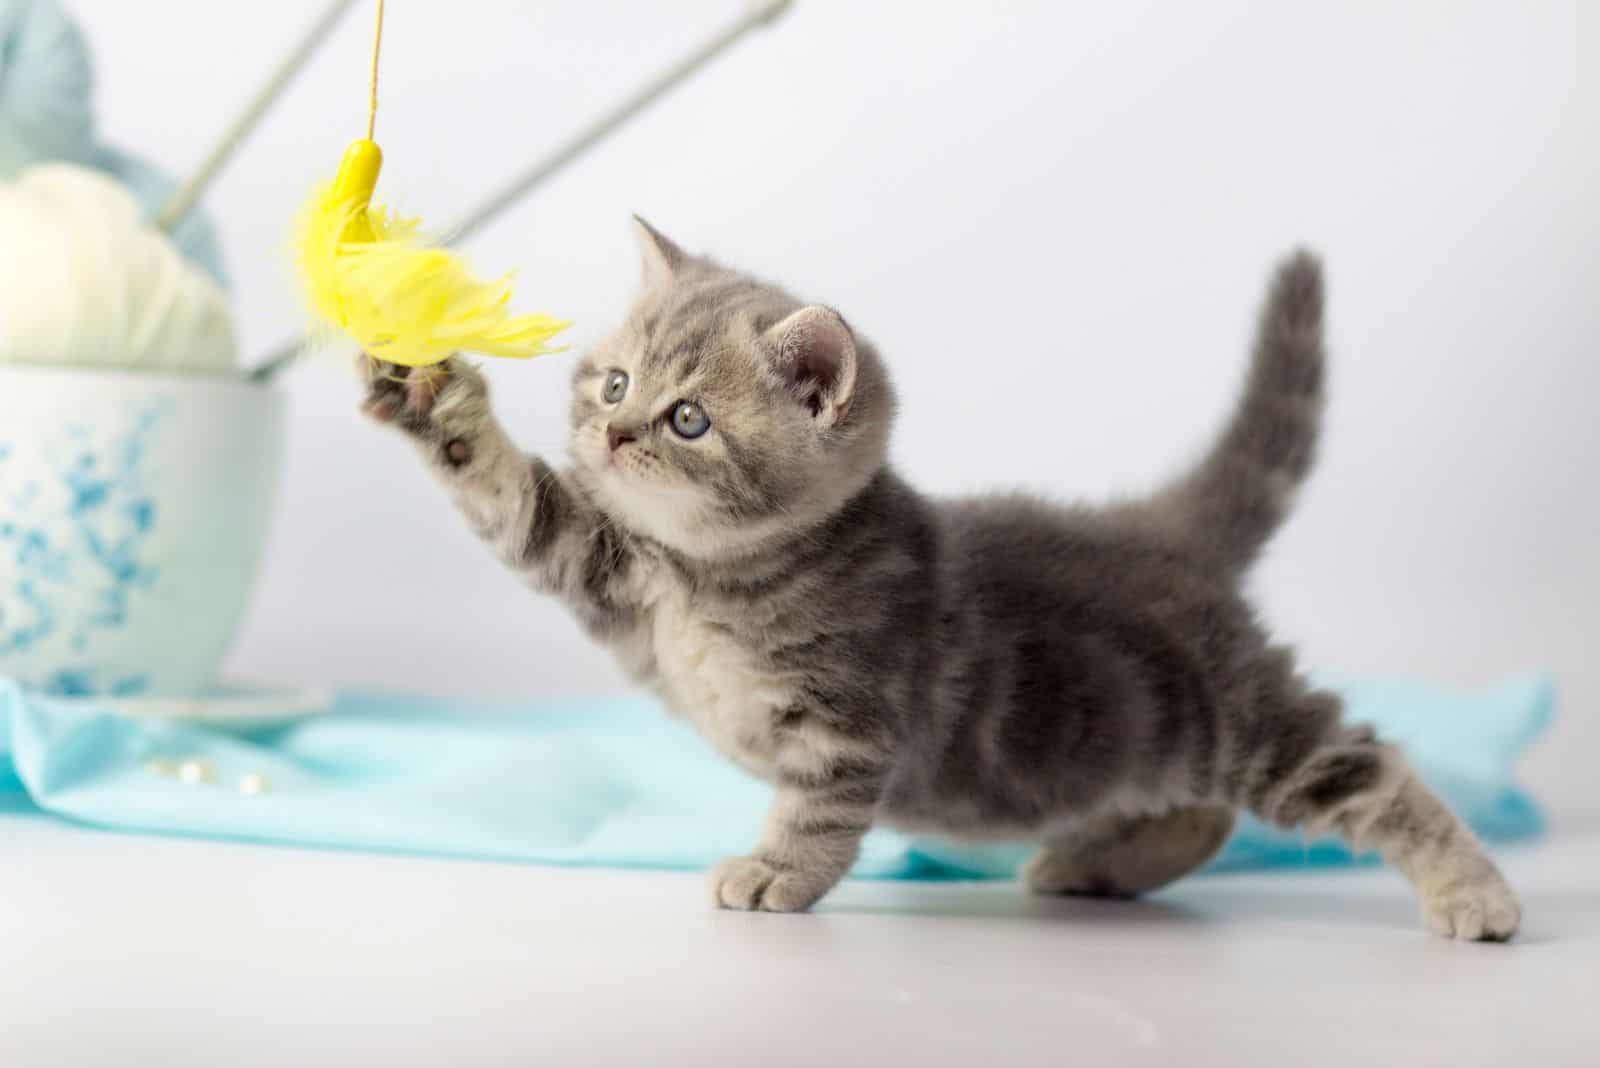 cute kitten is playing with yarn ball